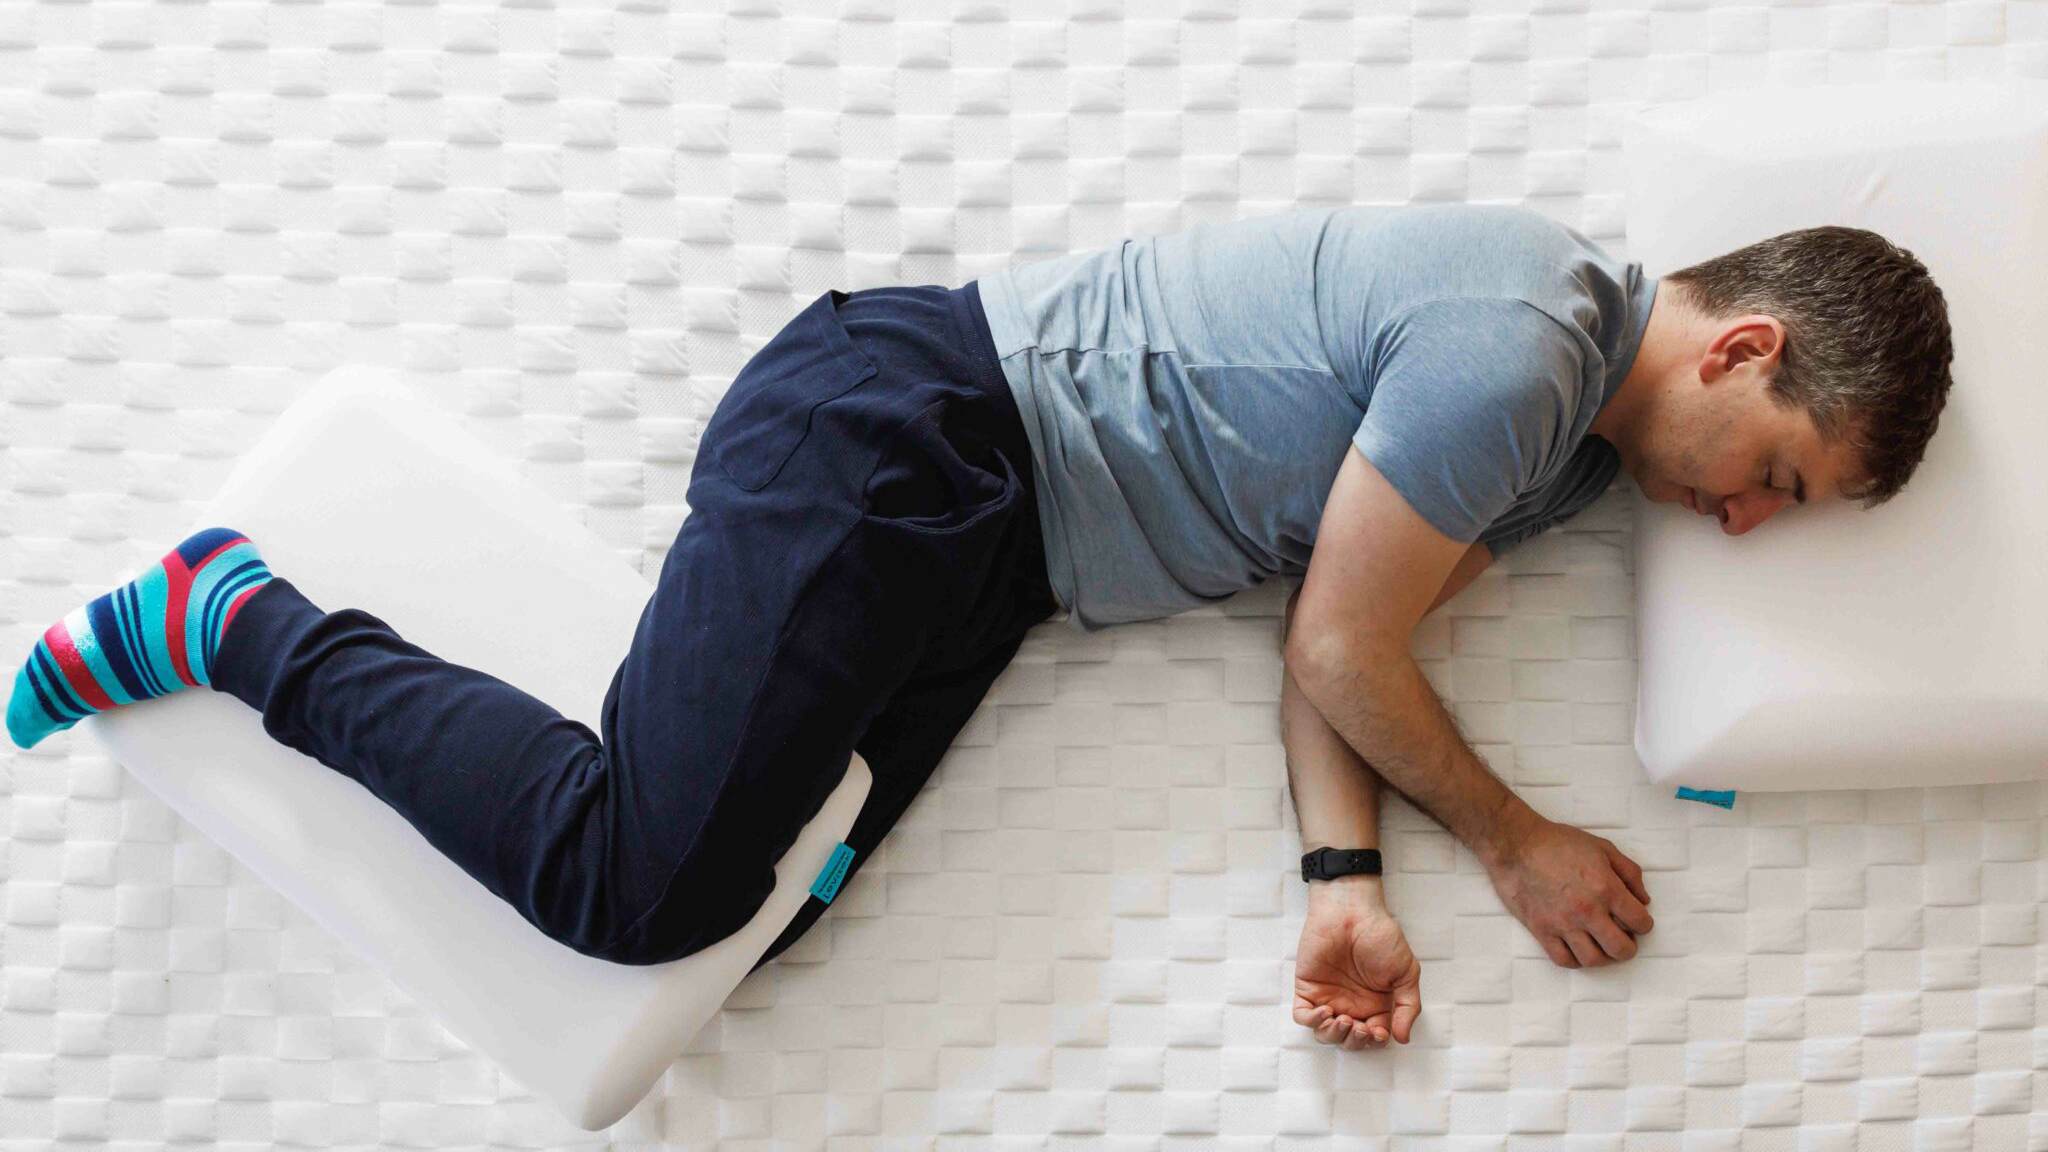 What is the best position for sleeping? We asked an expert | TechRadar